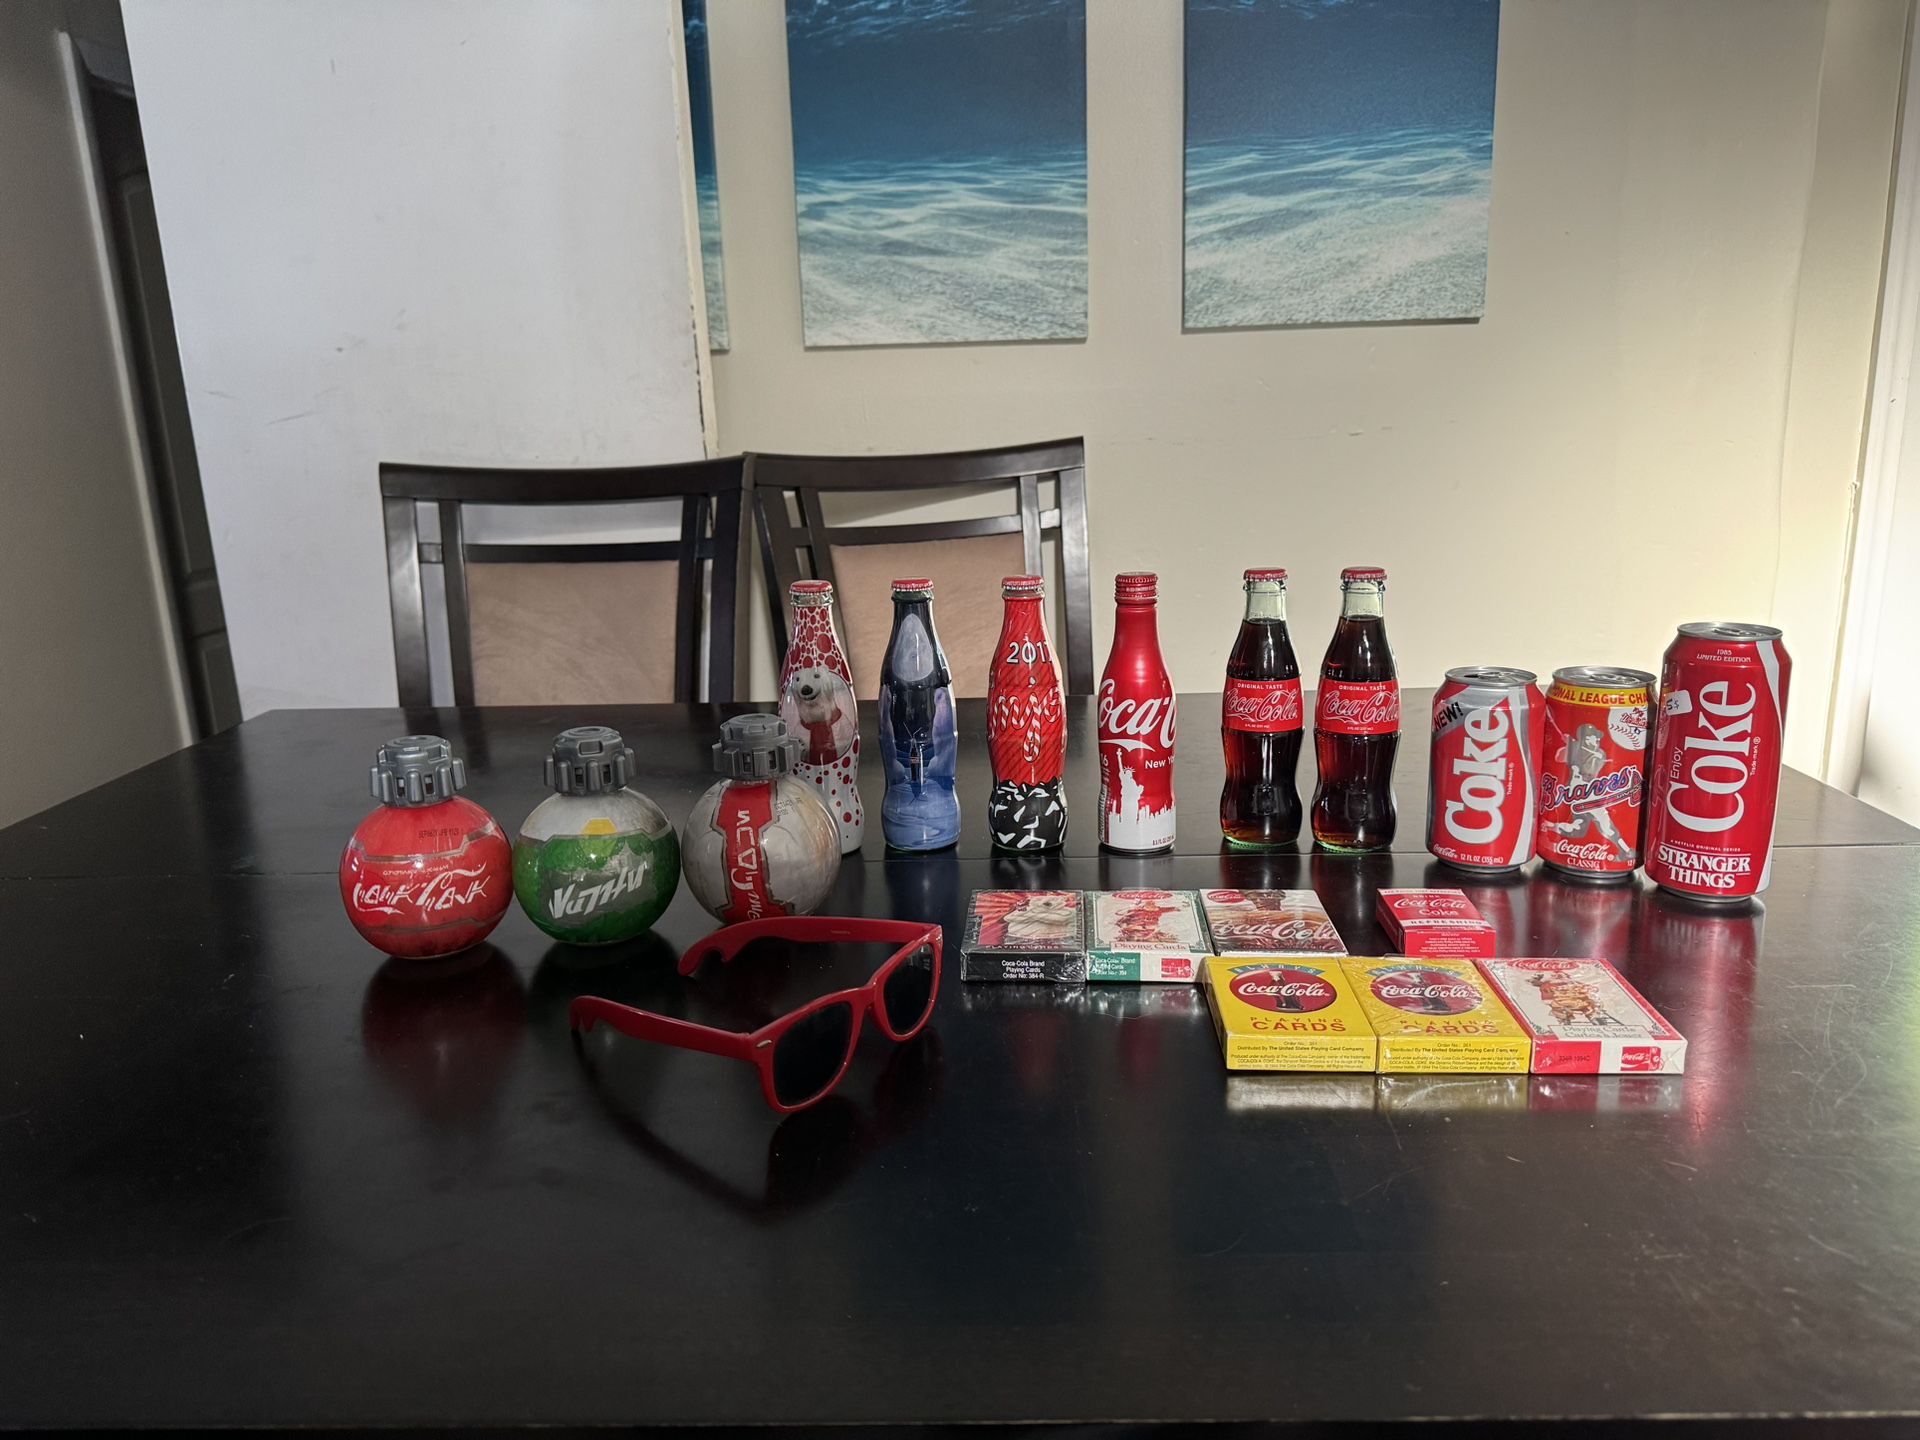 Coca Cola (Coke) Collection (Bottles, glasses, cards, and collectibles).